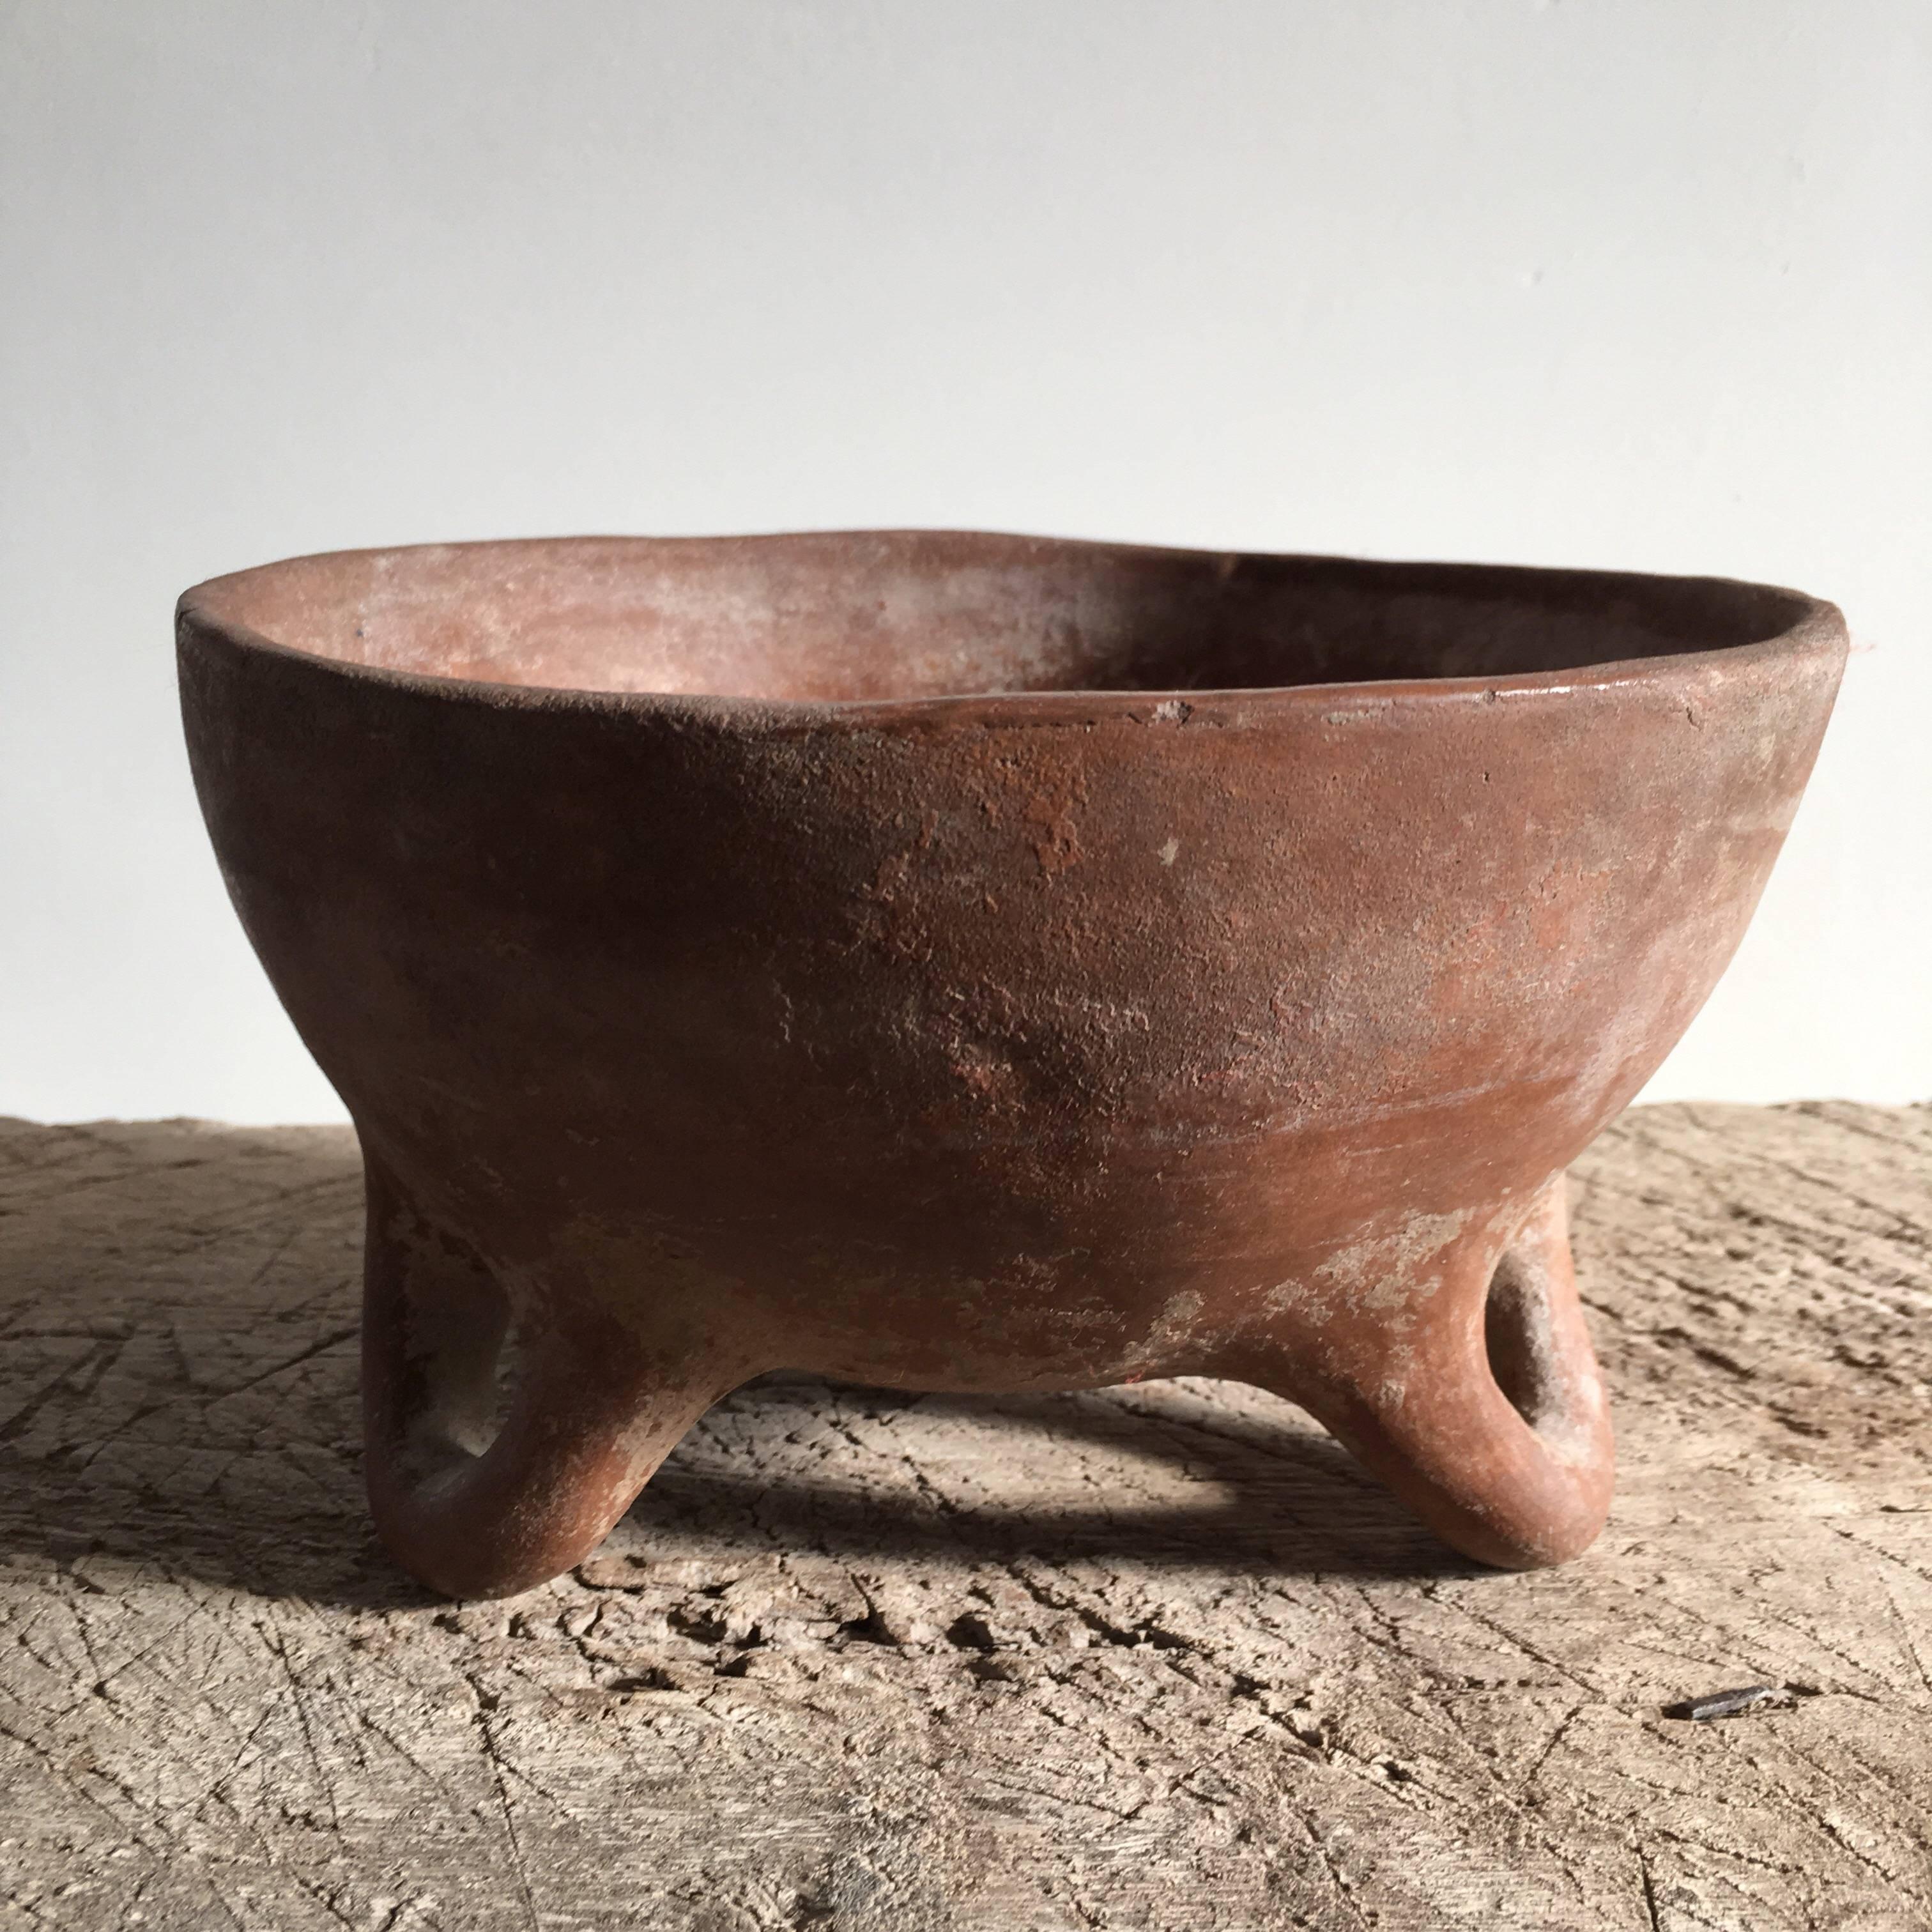 Terracotta bowl from the state of Guerrero.